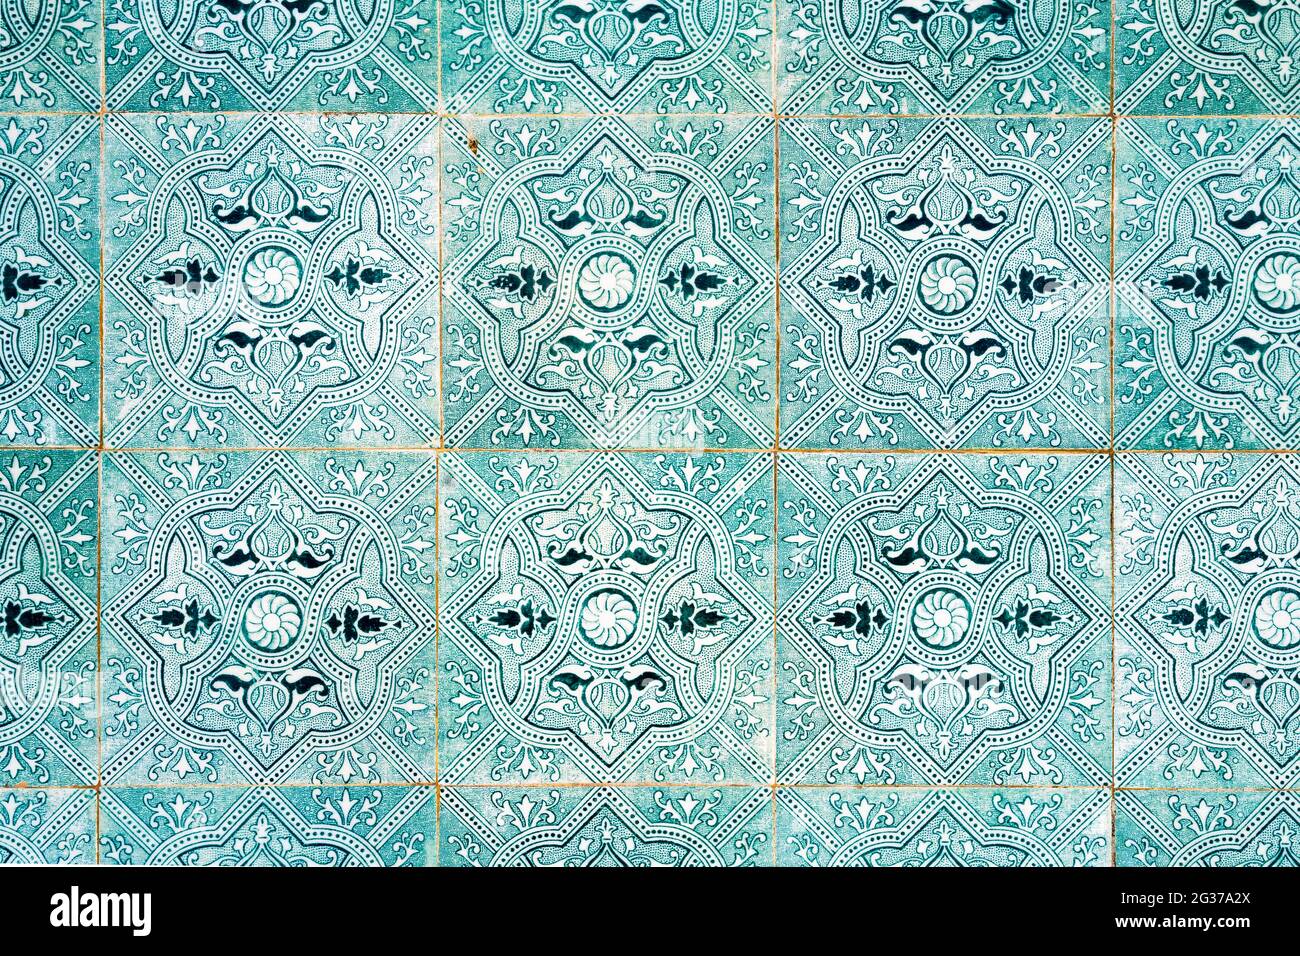 Portuguese tiles called azulejos on the wall of old typical building Stock Photo